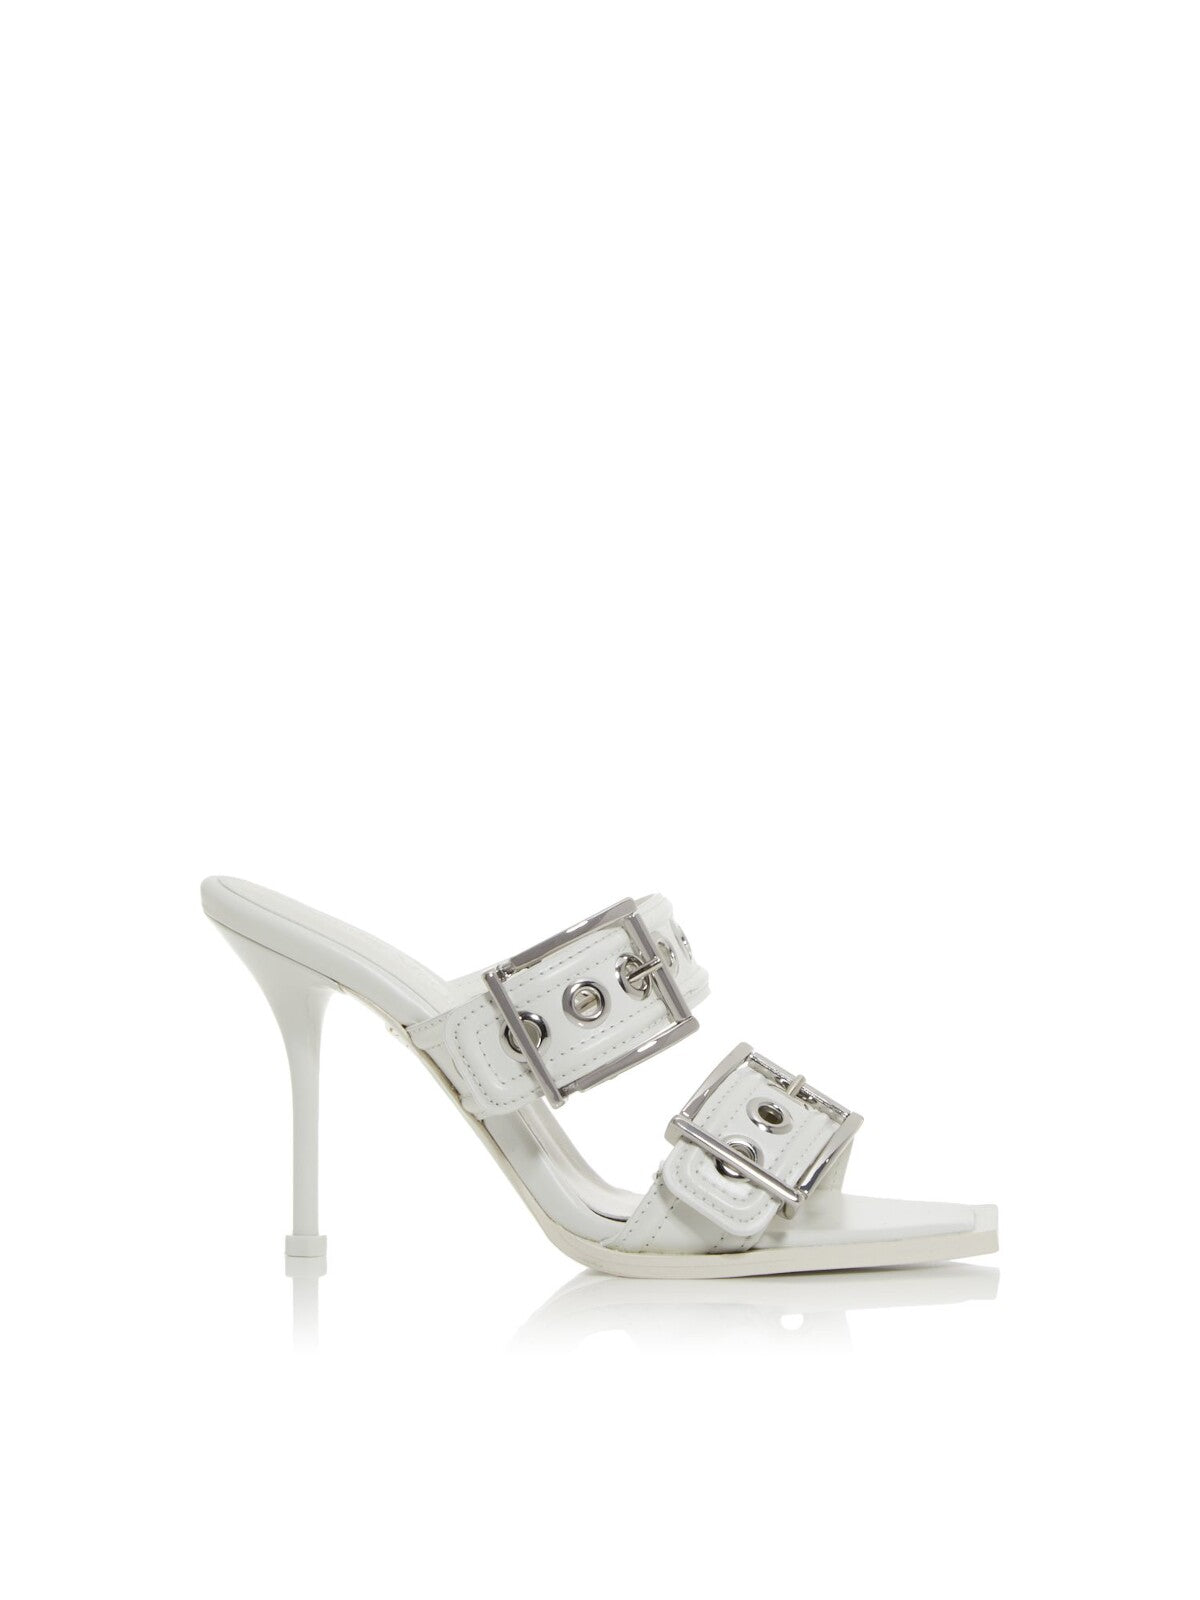 ALEXANDER MCQUEEN Womens White Grommets Padded Square Toe Stiletto Buckle Leather Heeled Sandal 38